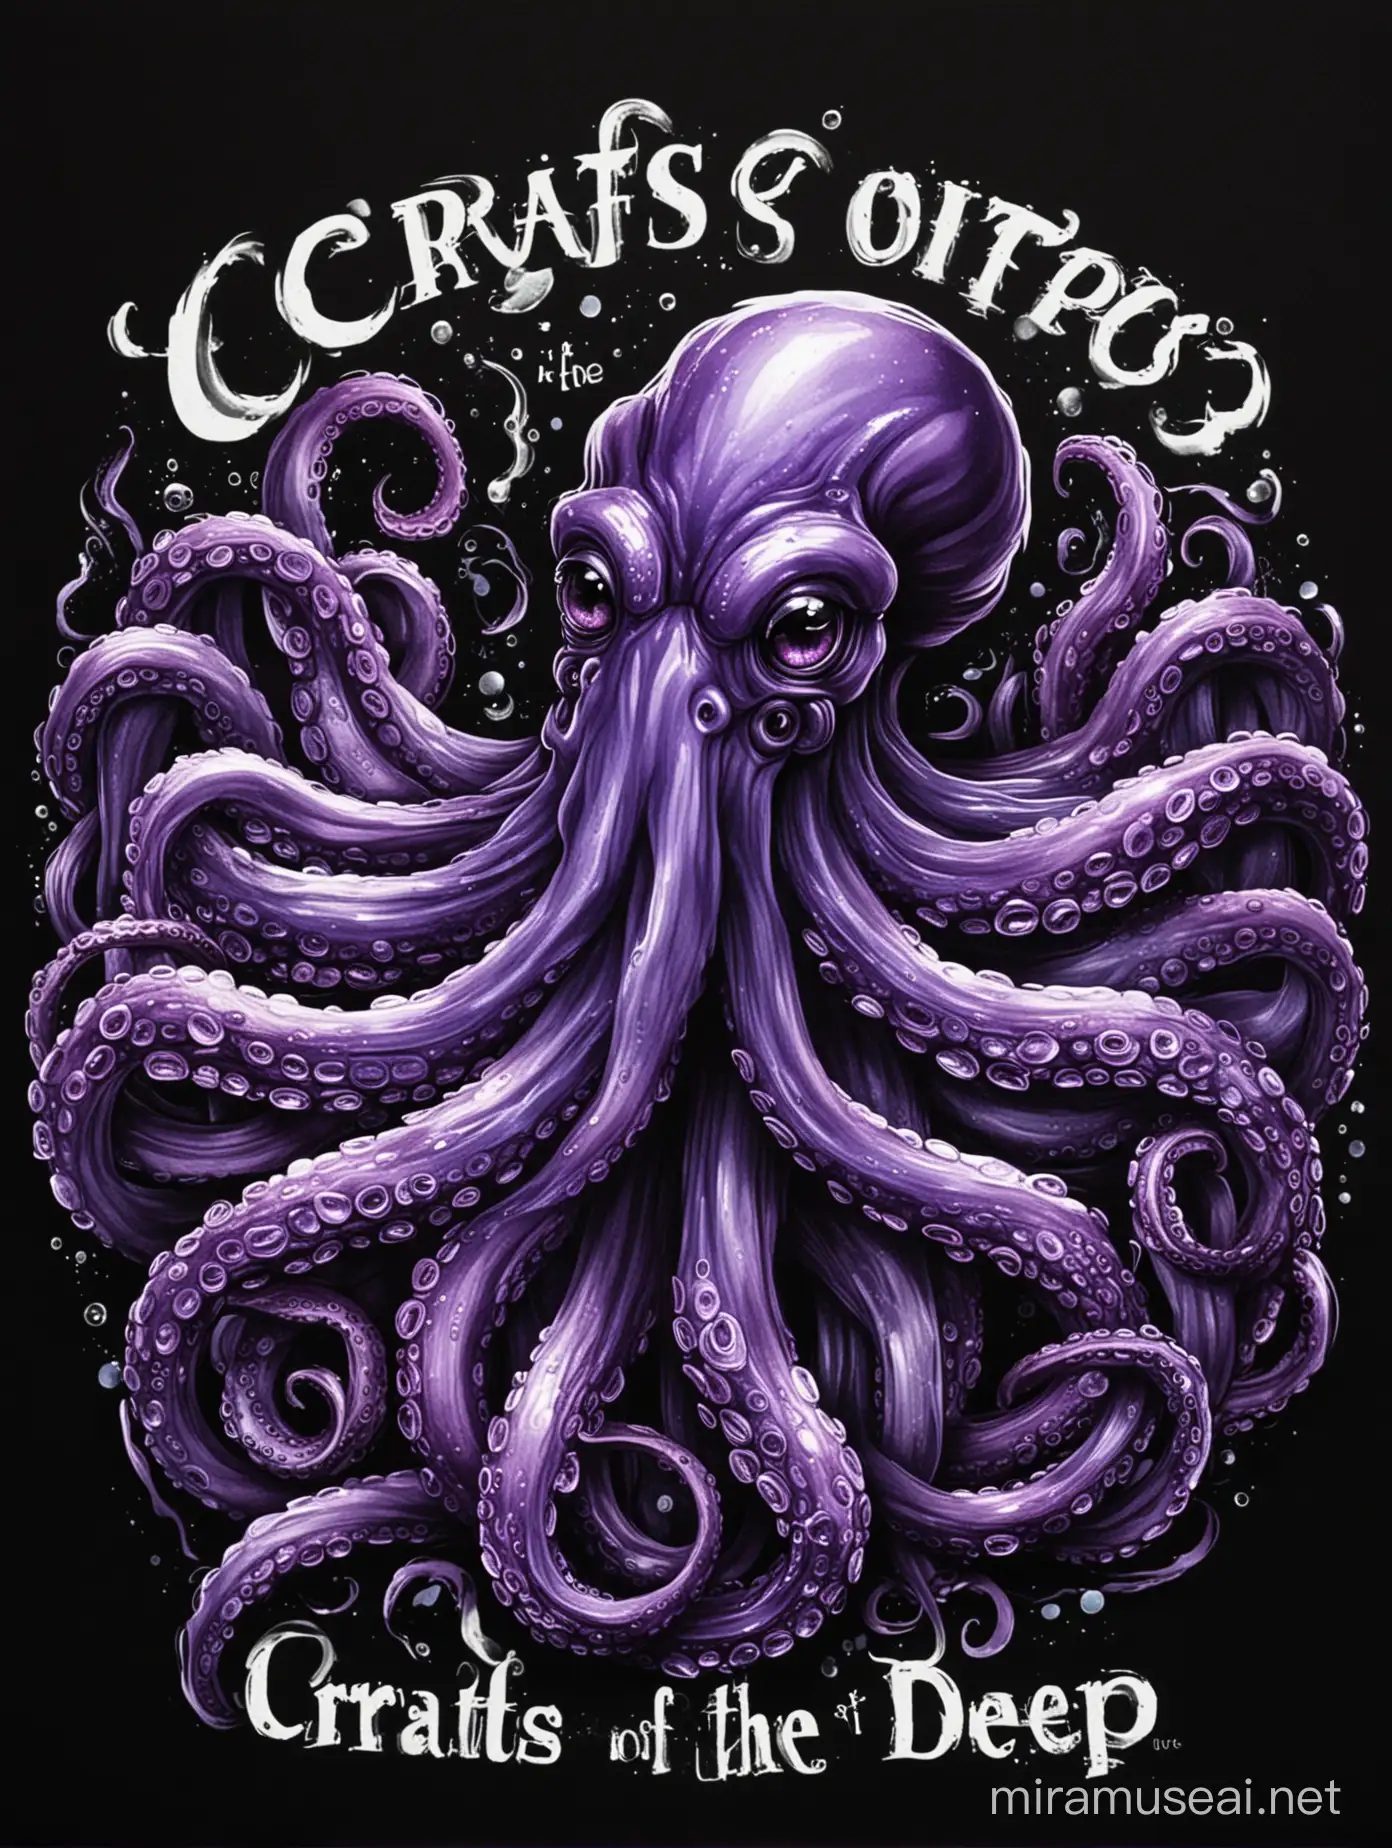 Violett octopus in the style of a streamer logo with the caption „Crafts of the Deep“, black background